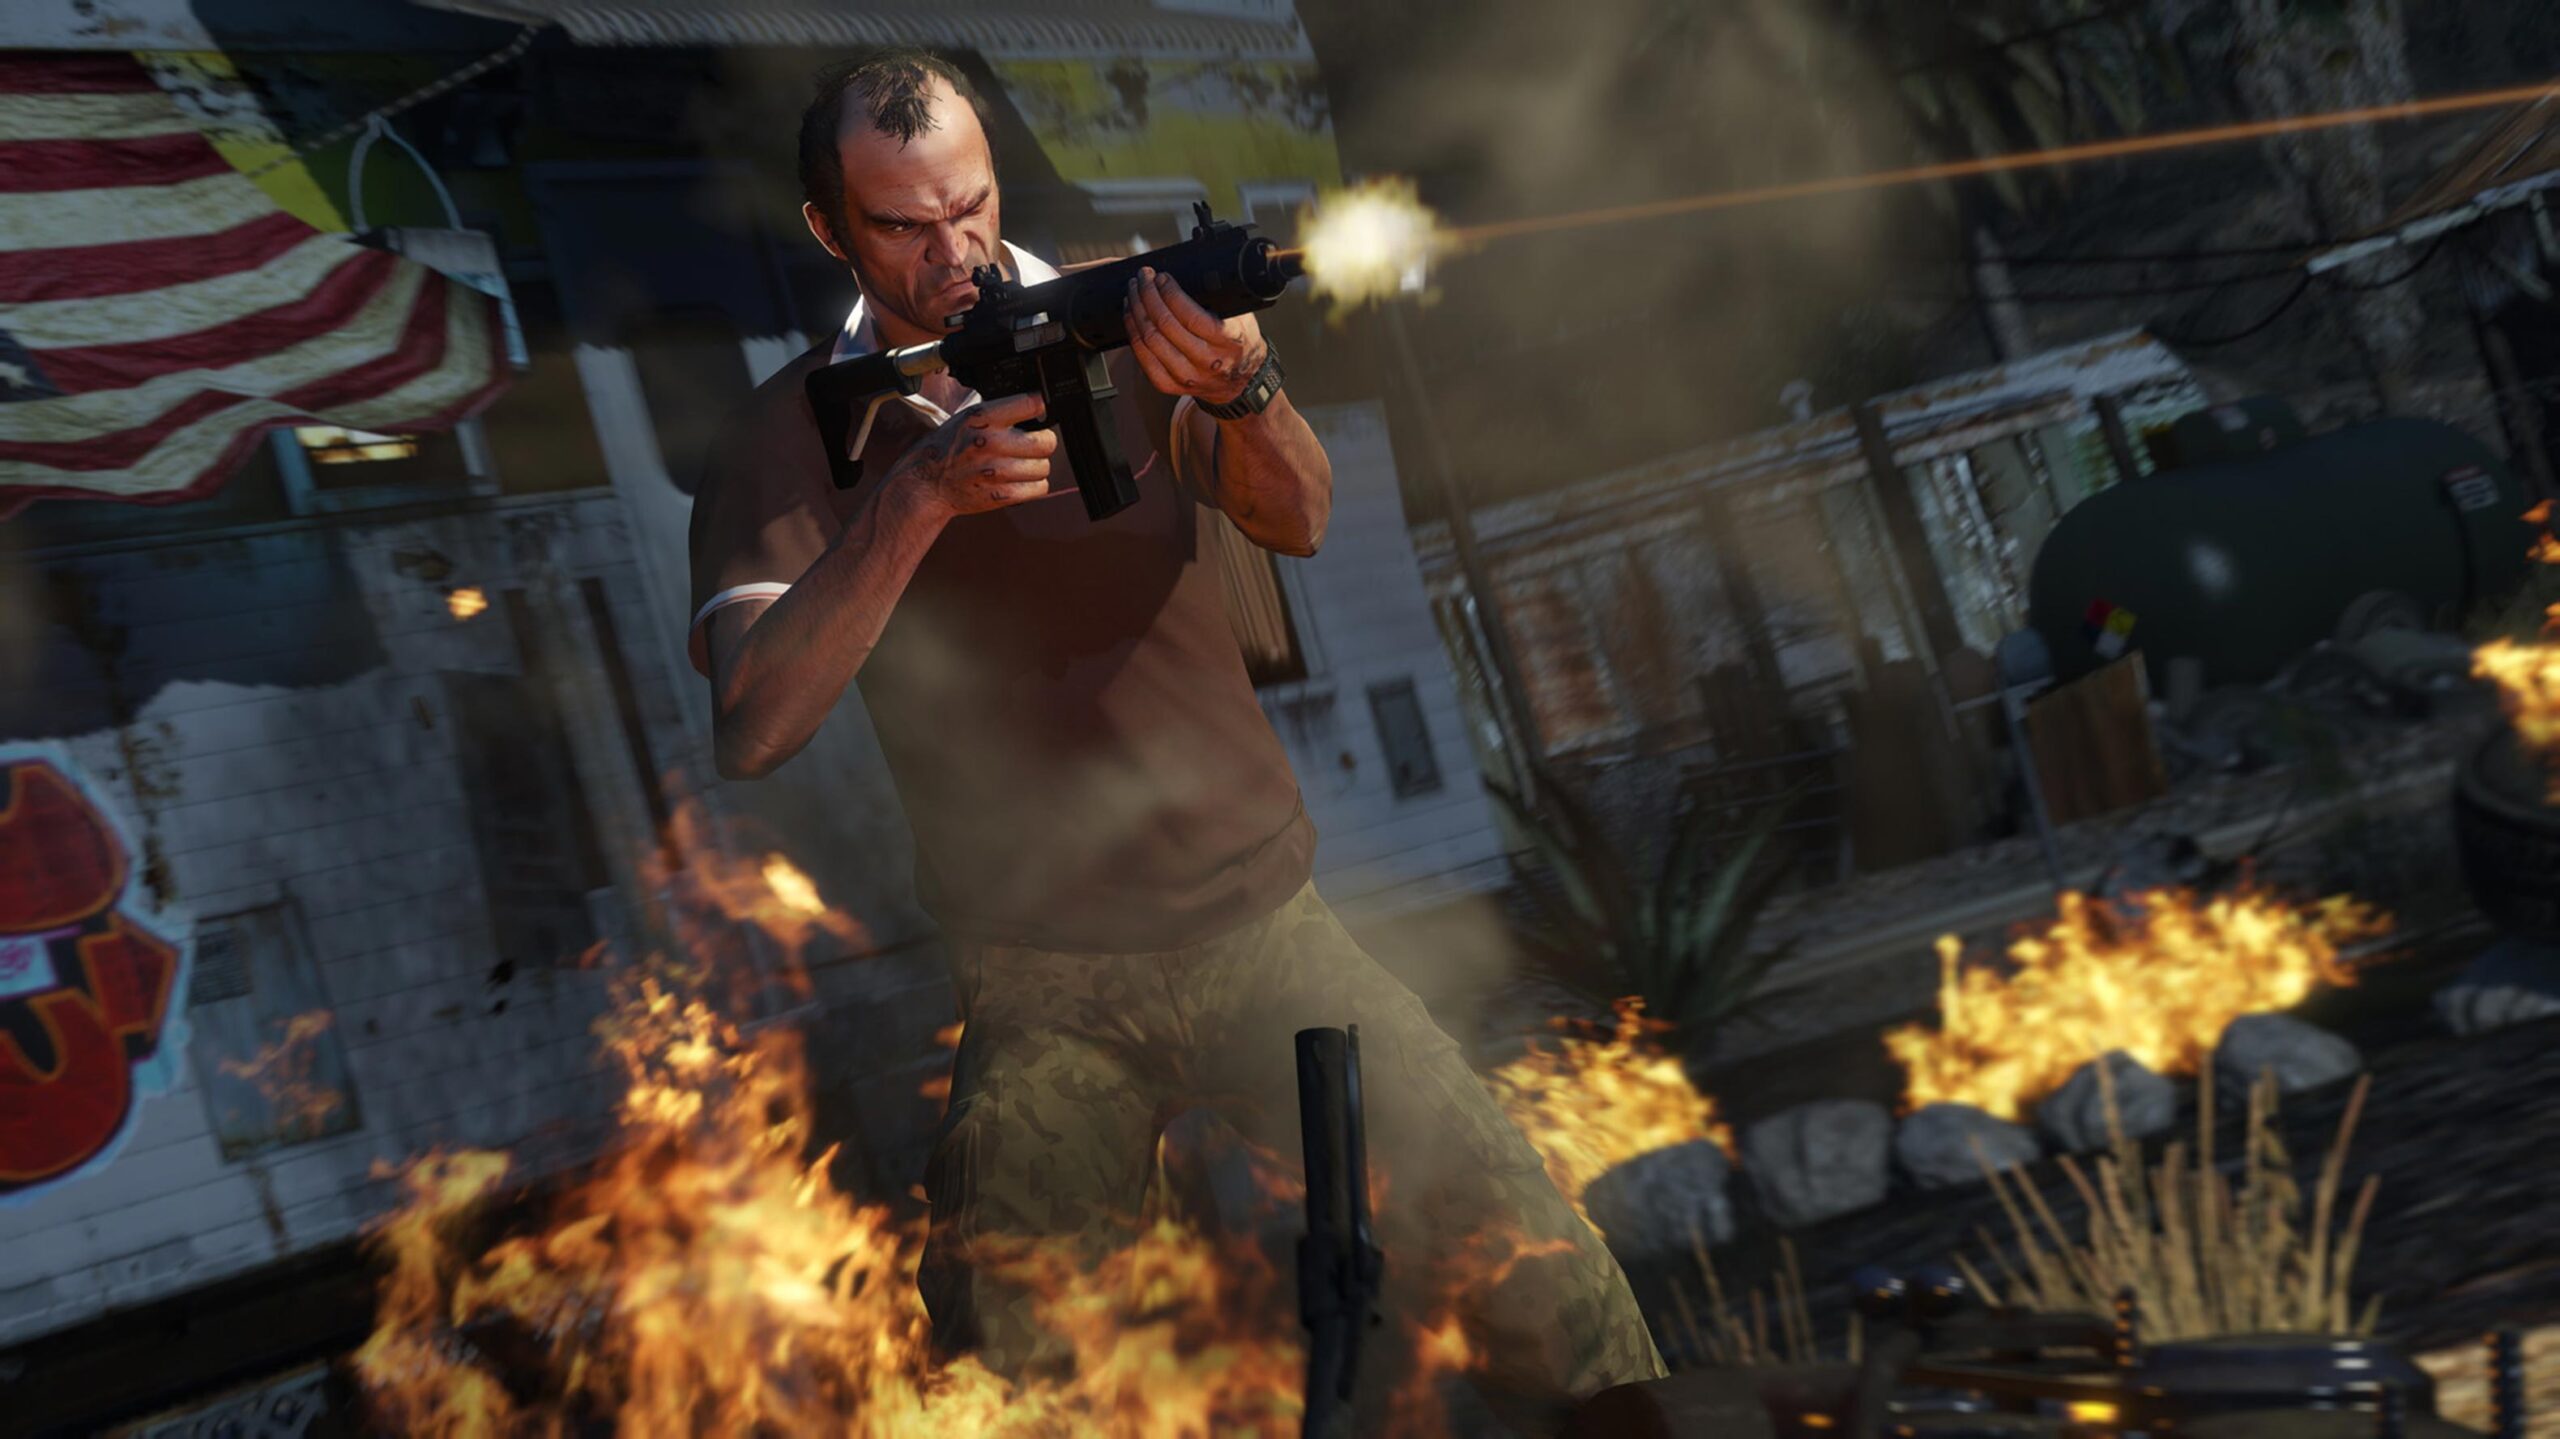 Grand Theft Auto publisher Take-Two lays off hundreds, axes several projects